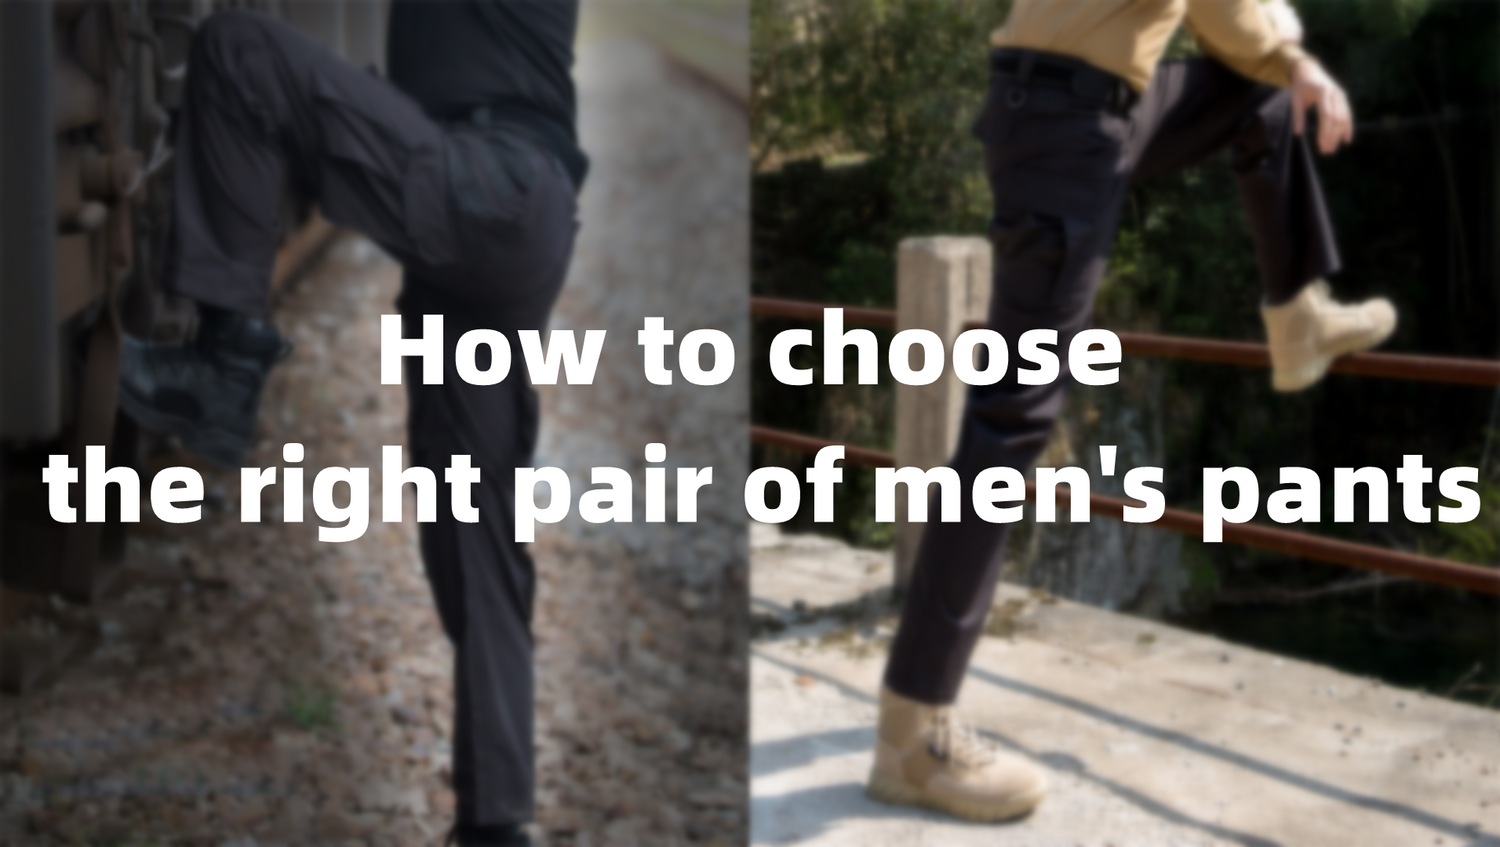 How to choose the right pair of men's pants